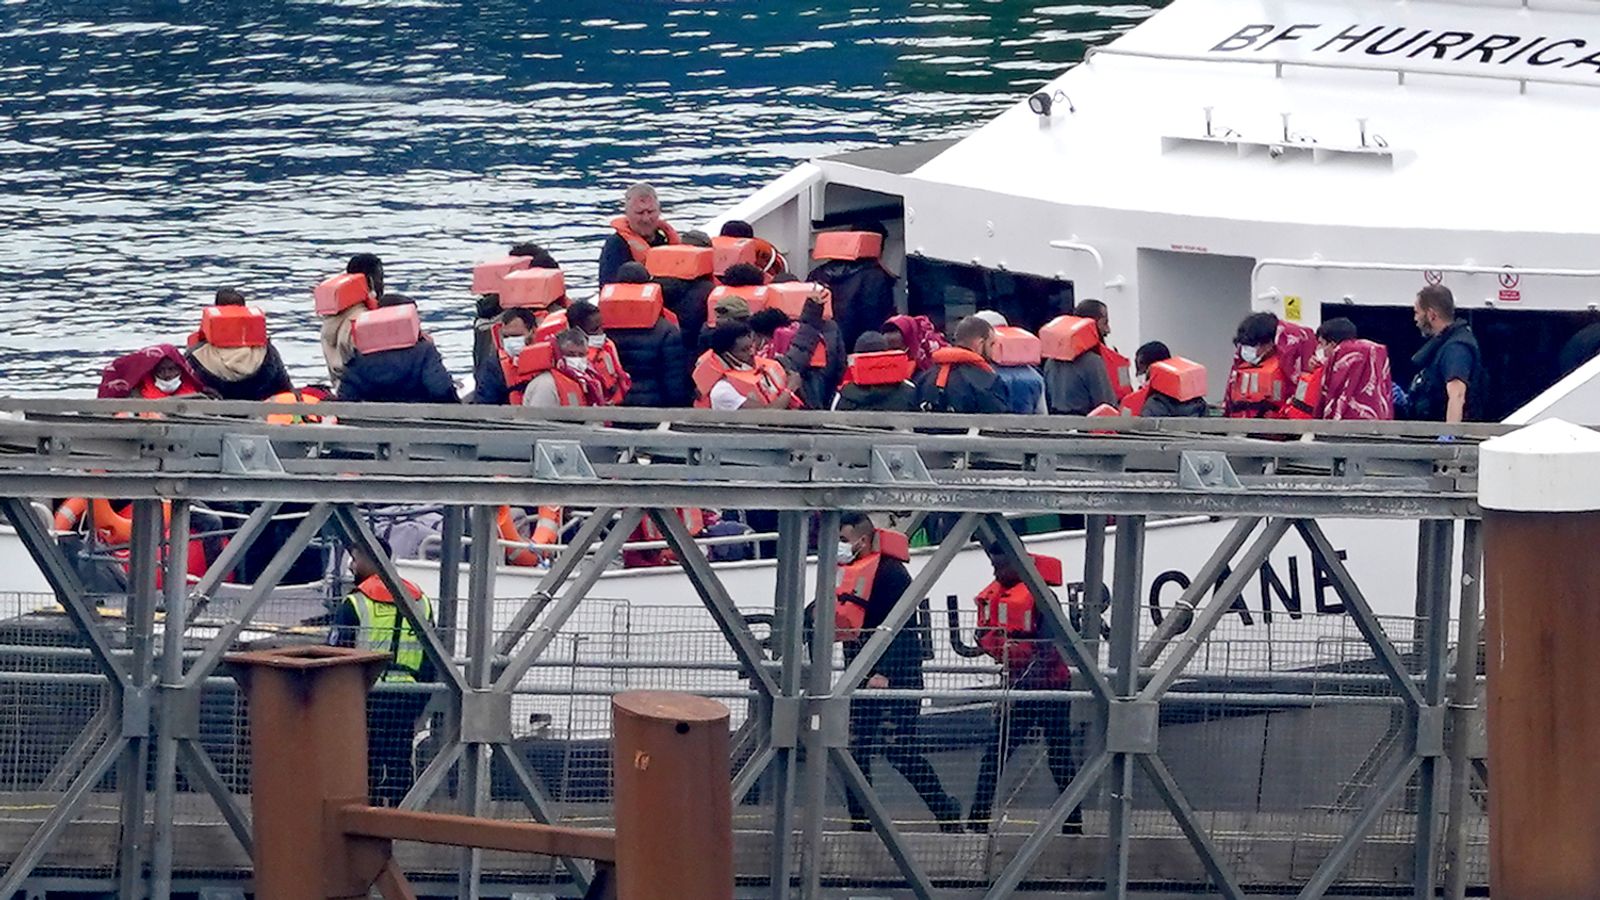 Channel crossings: Facebook and TikTok team up with police to crack down on people smugglers